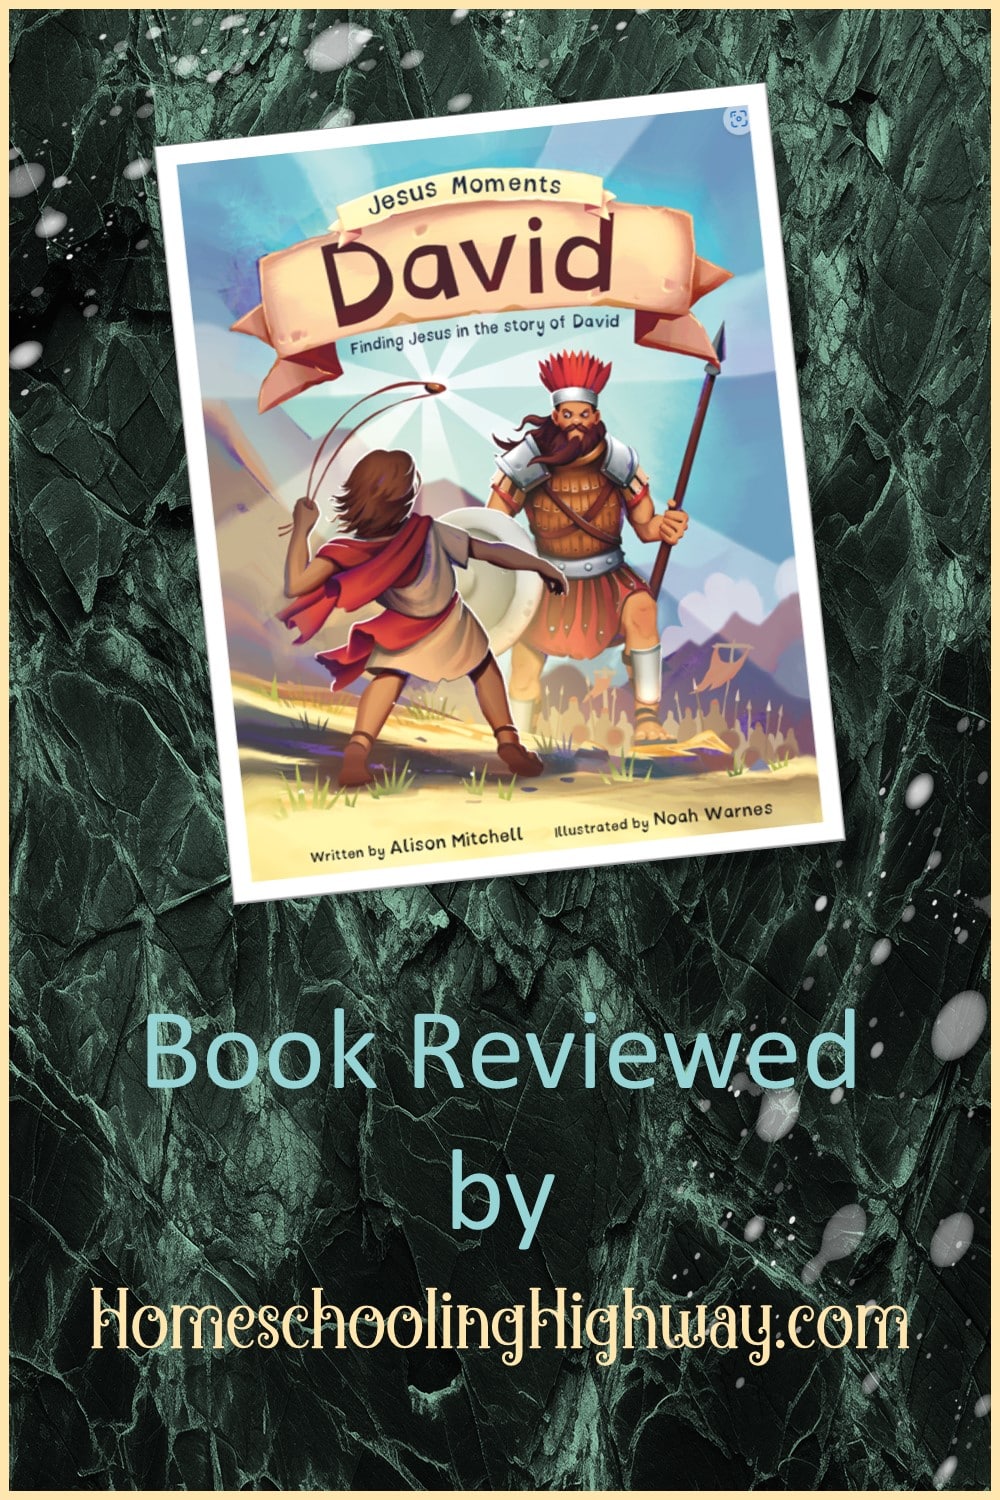 Jesus Moments: David written by Alison Mitchell. Book reviewed by HomeschoolingHighway.com